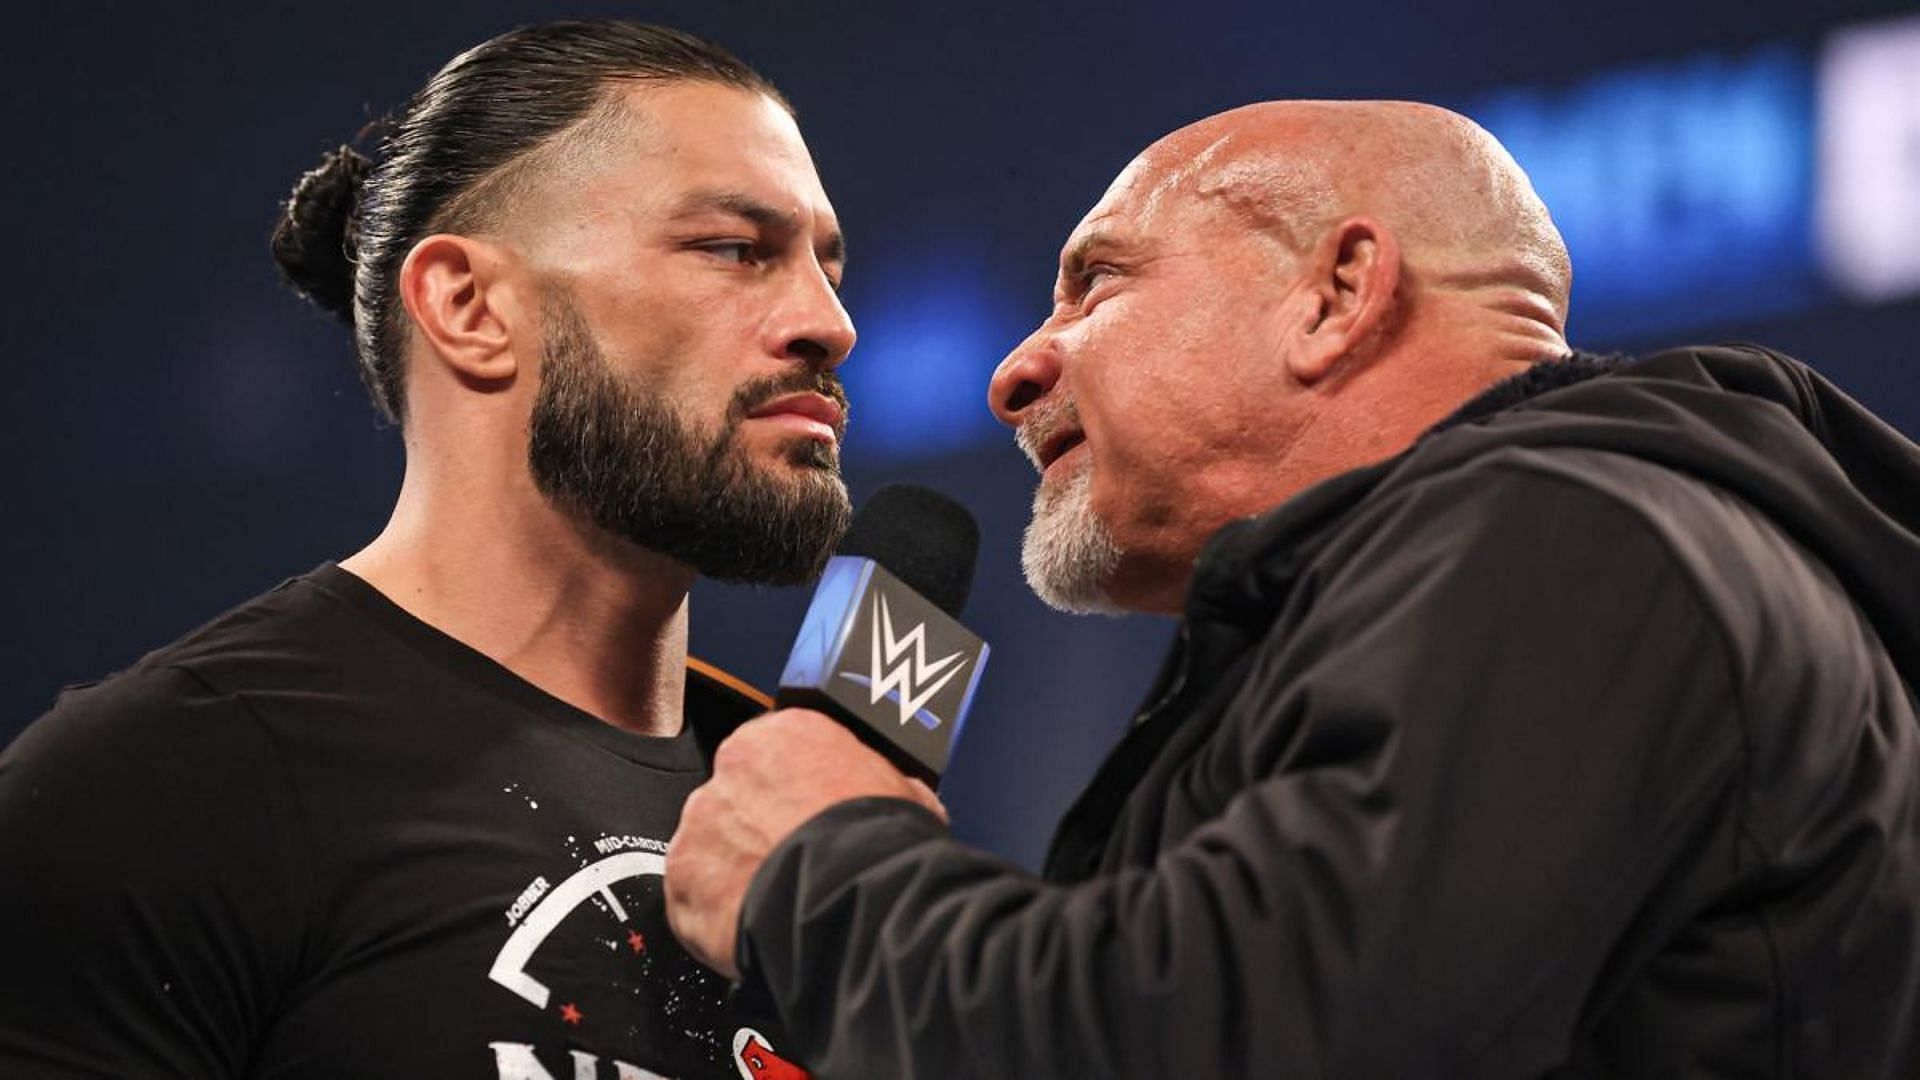 Roman Reigns is set to face Goldberg at the Elimination Chamber 2022 show